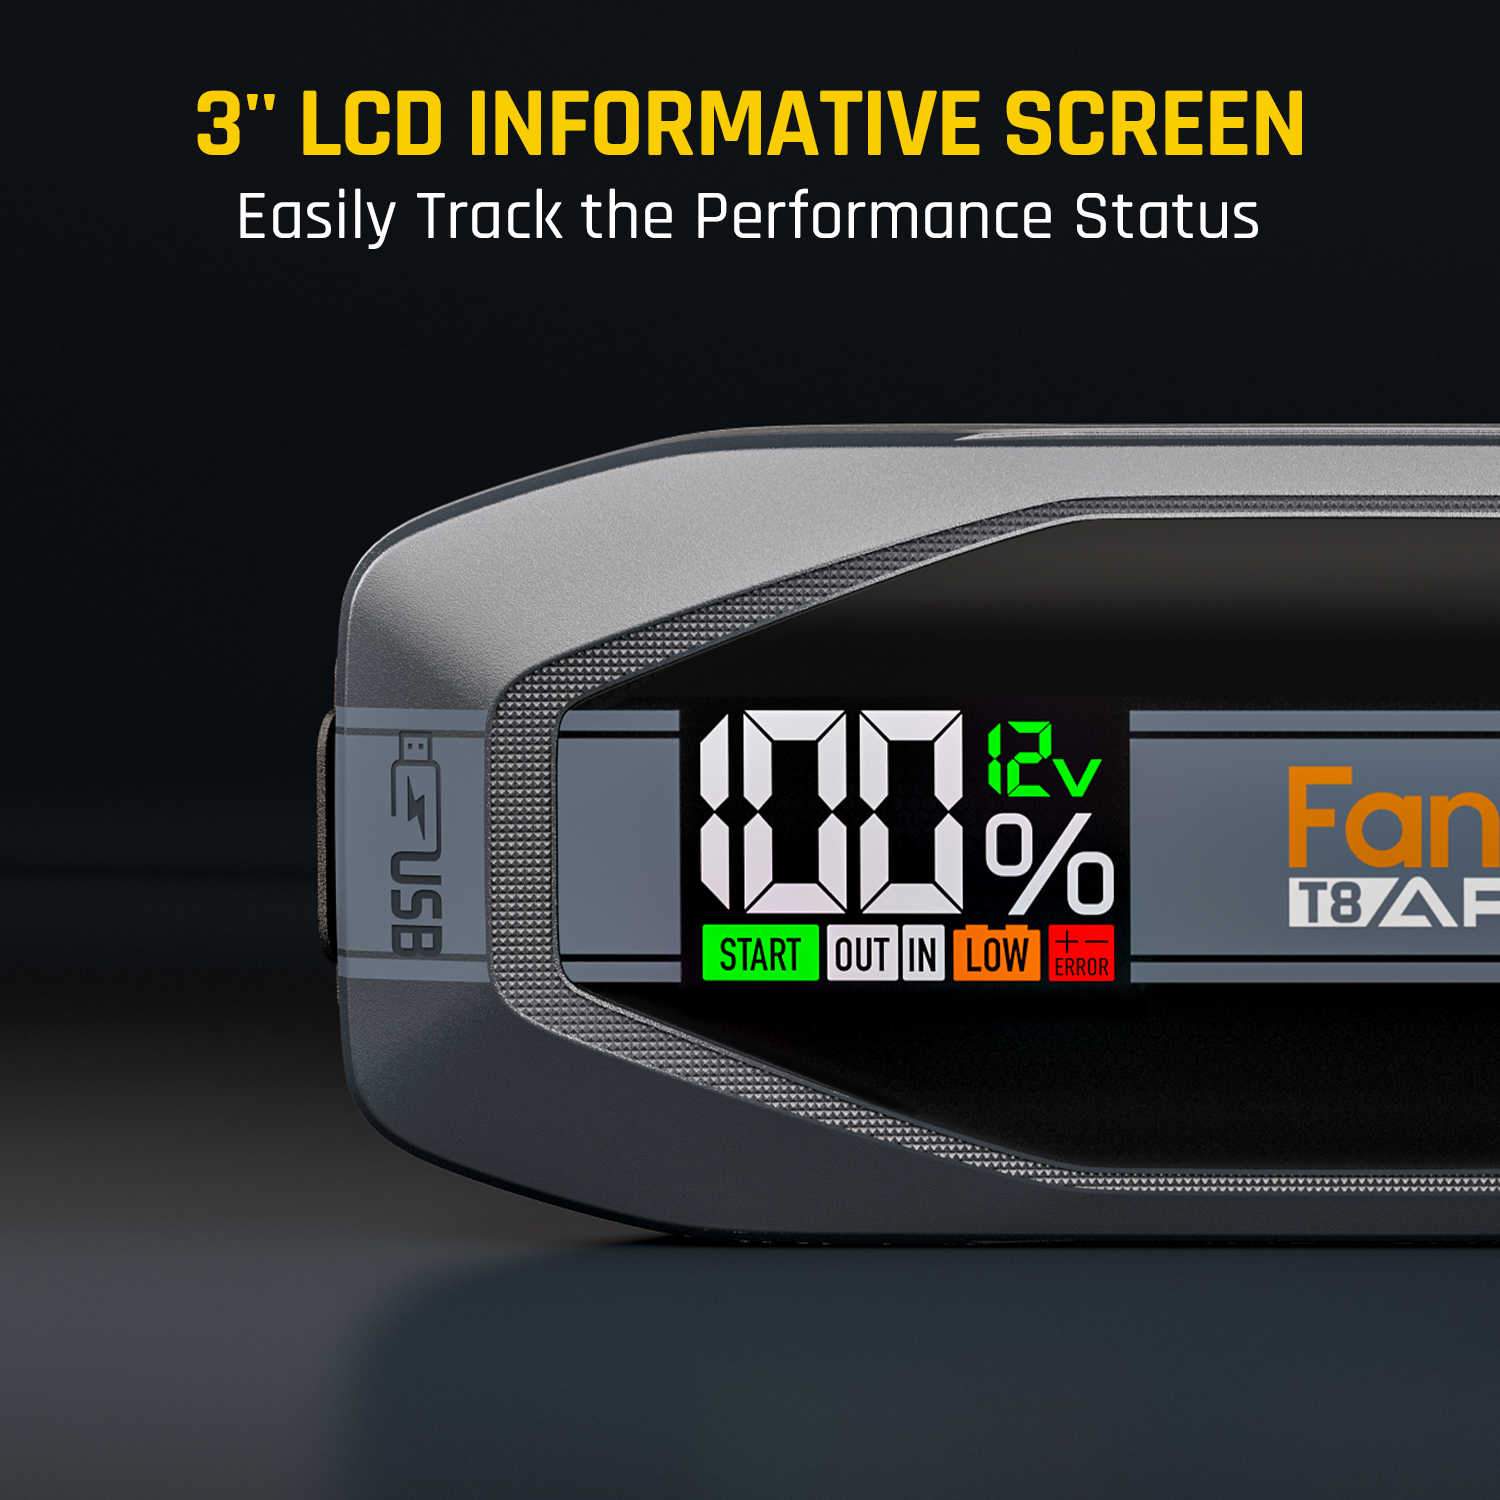 The T8 APEX has 3'' LCD informative screen for tracking the performance status easily